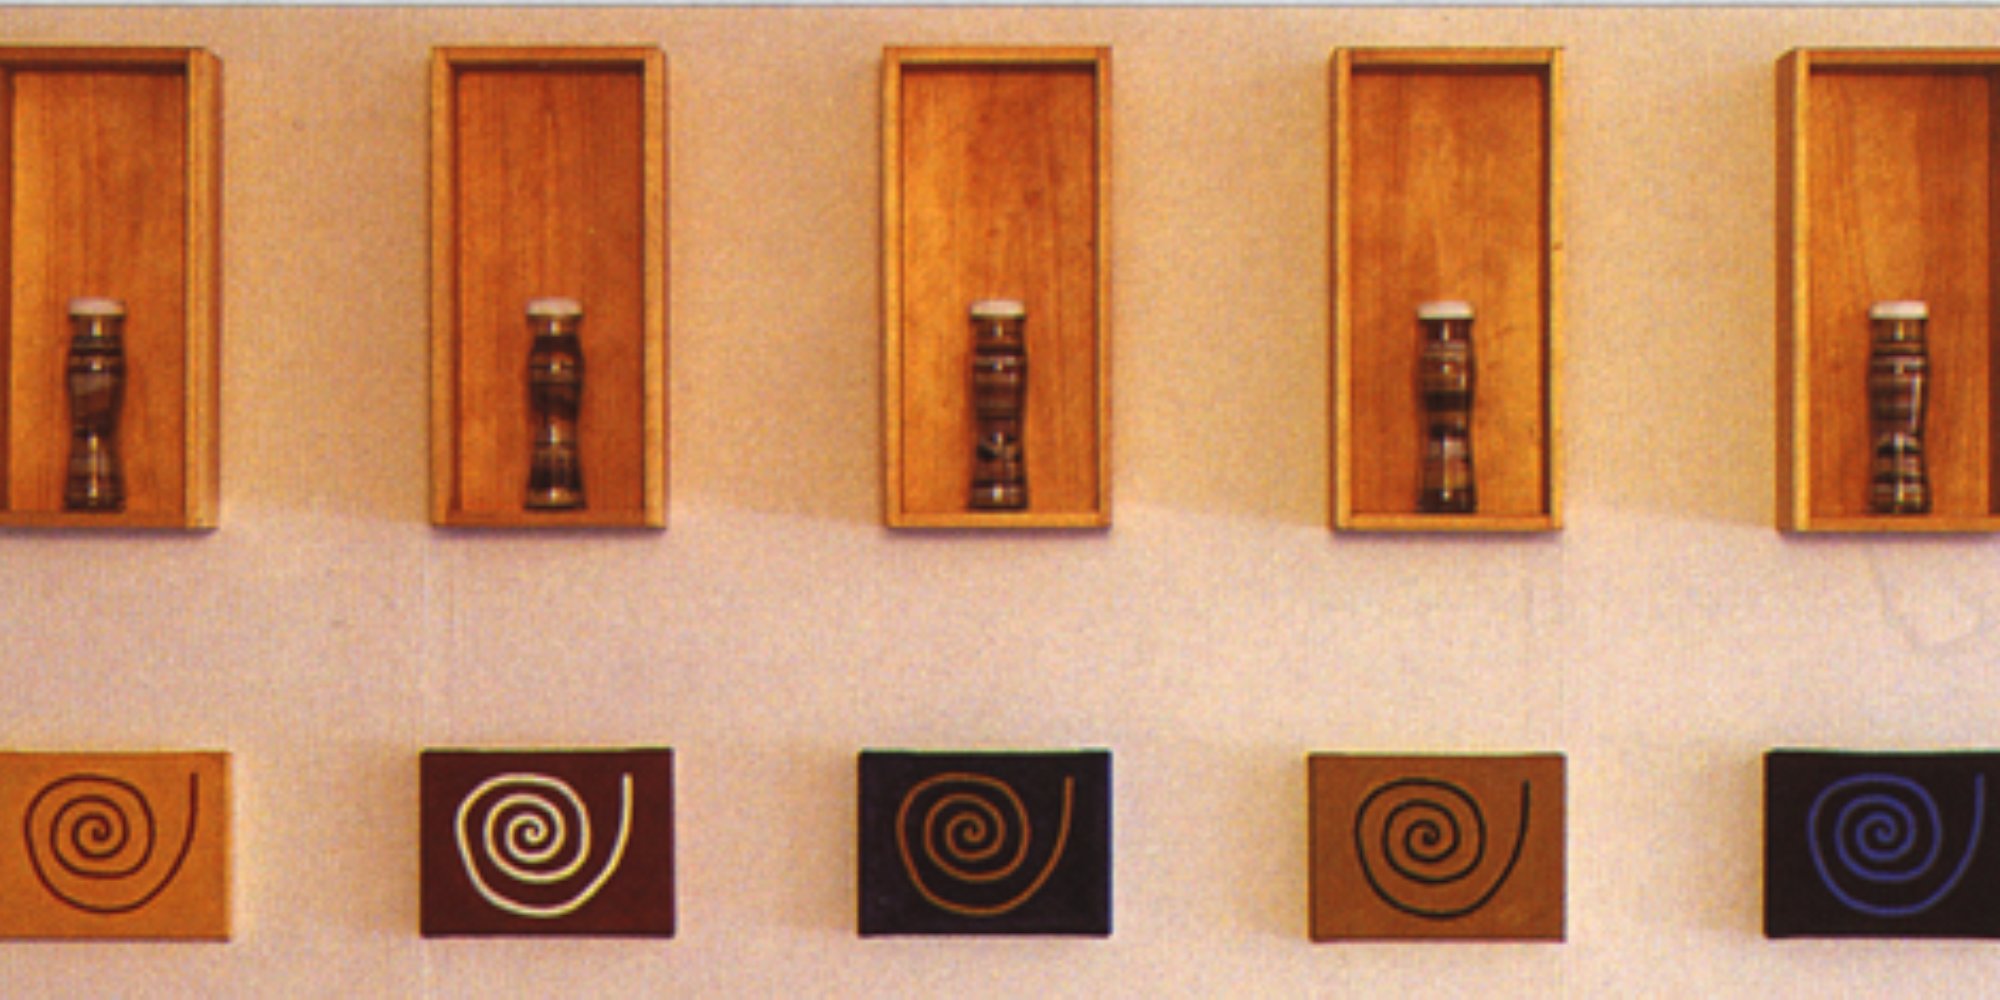 Fiona Foley, Spiral Presence, Coloured Sand, 1997, wooden boxes, glass bottles, sand, paint on canvas (detail)